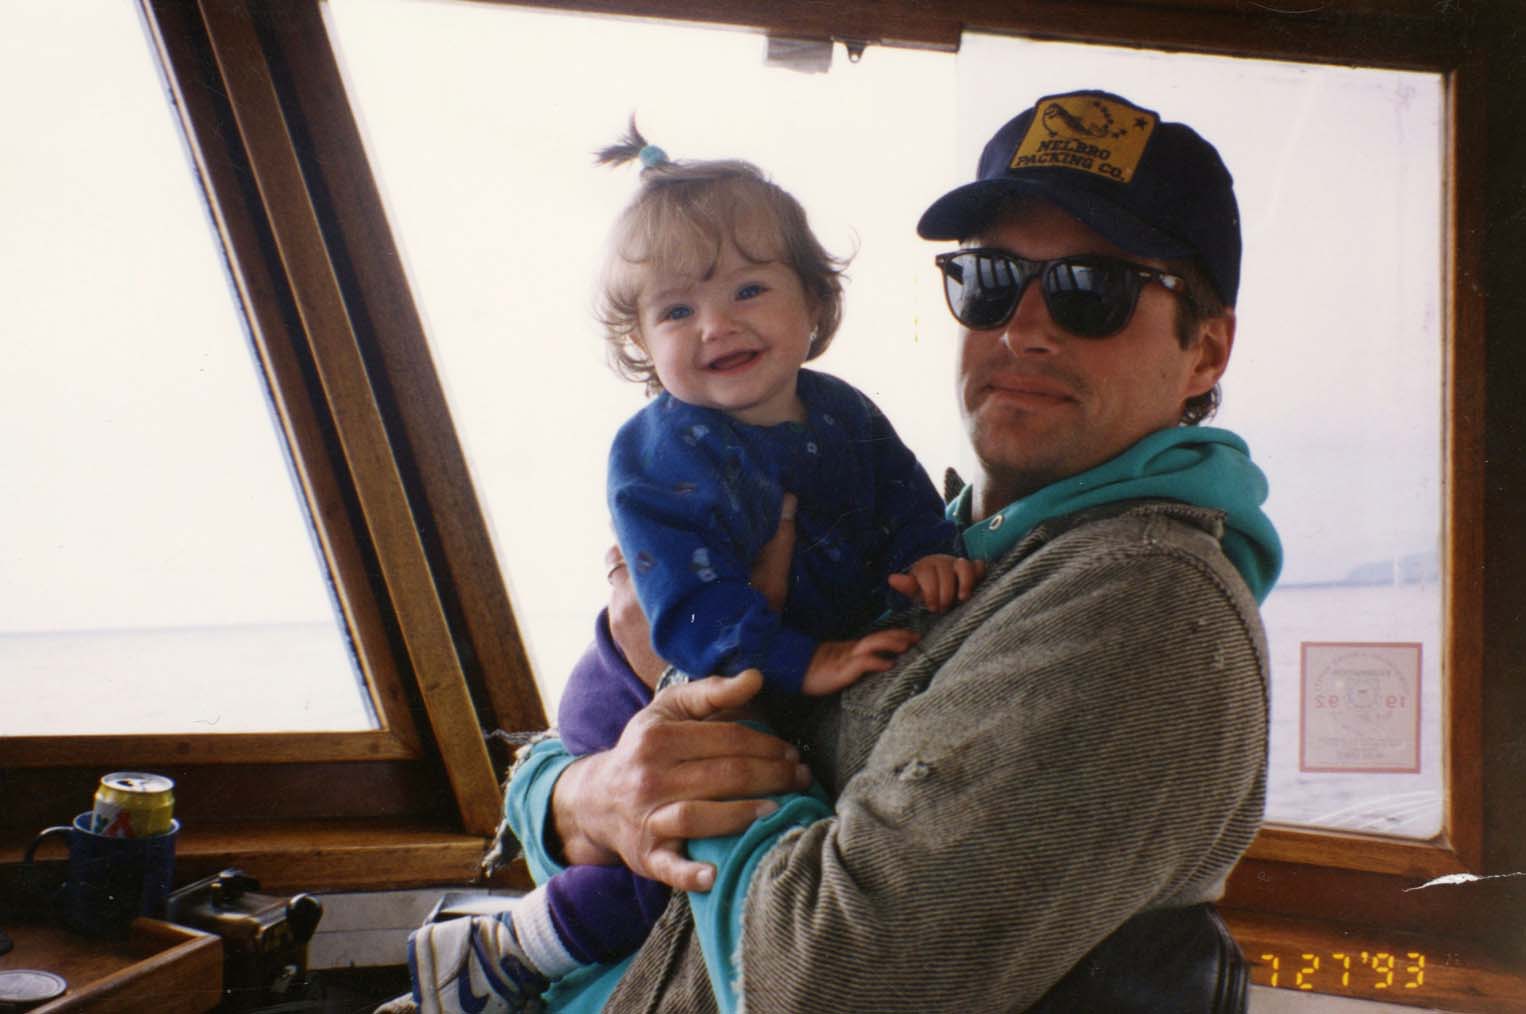 McKenna as a toddler, held by her father. Photo dated 07-27-1993